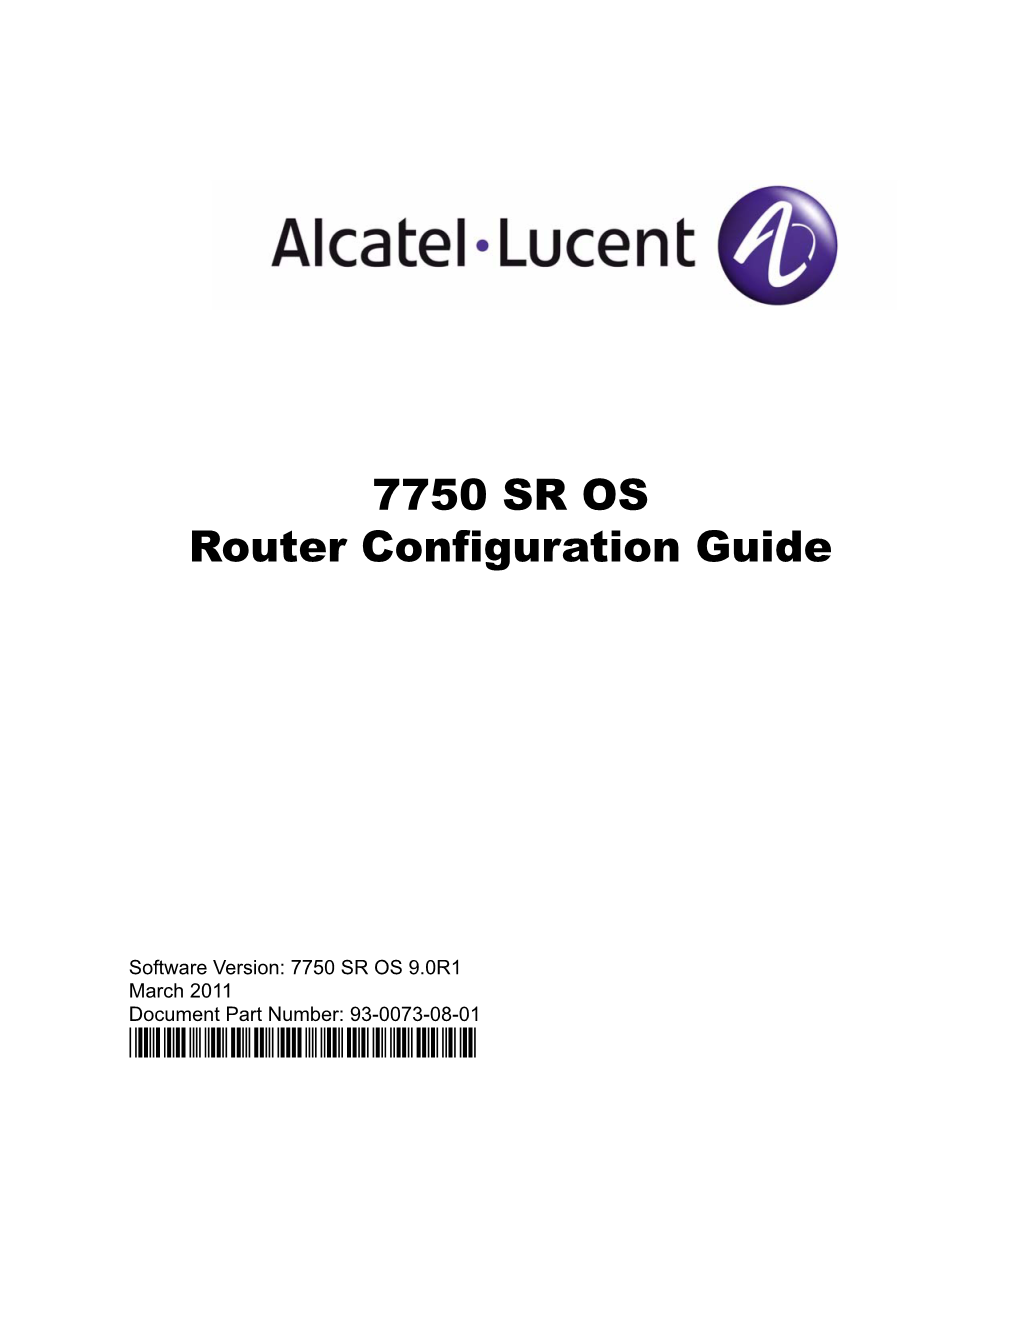 7750 SR OS Router Configuration Guide